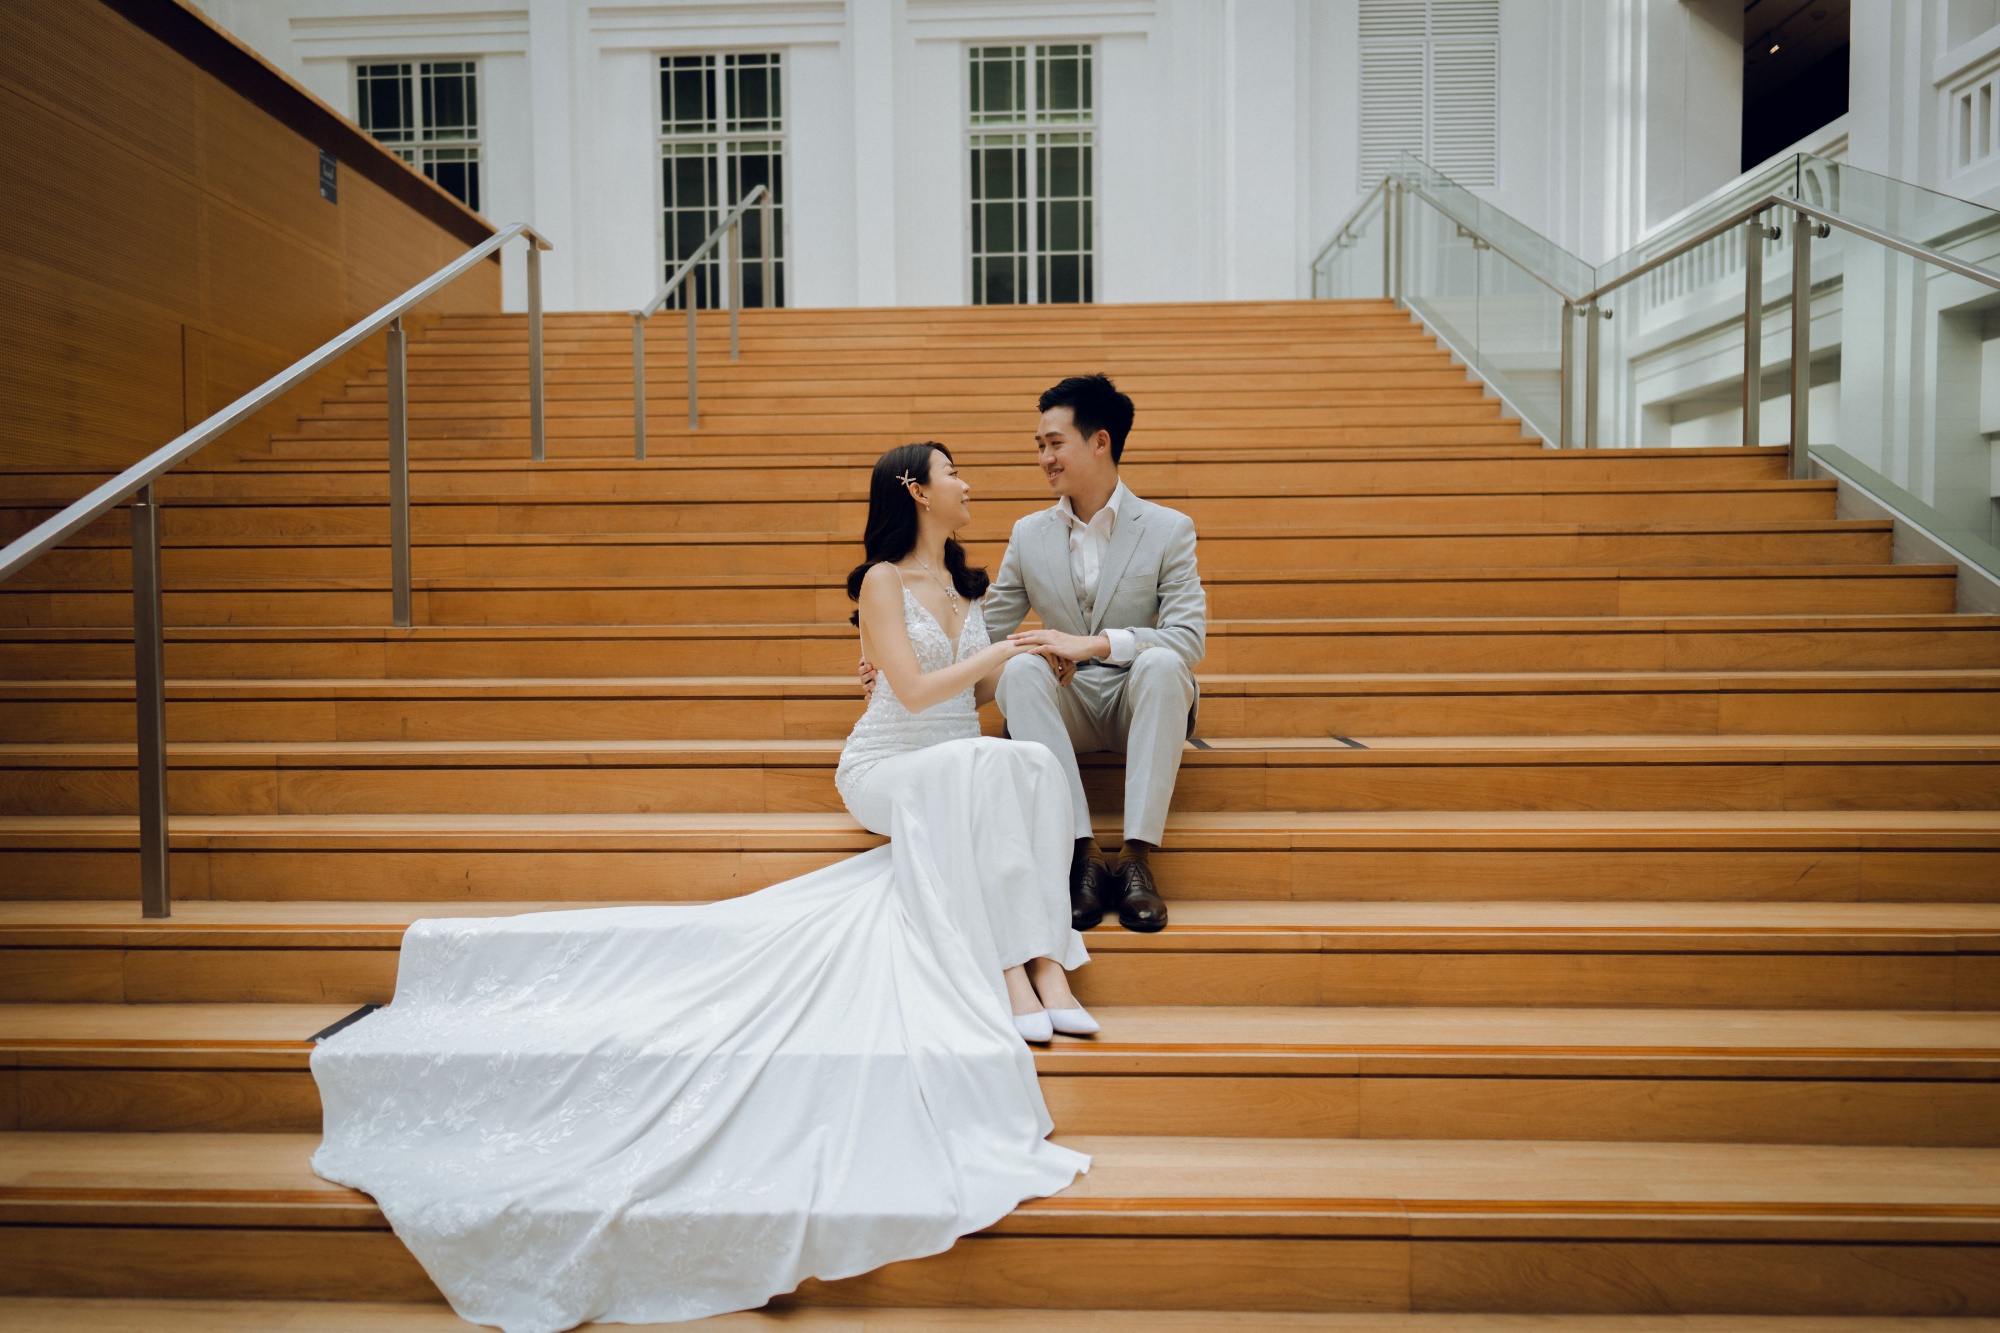 Prewedding Photoshoot At National Gallery And Armenian Street Carpet Shop by Samantha on OneThreeOneFour 3